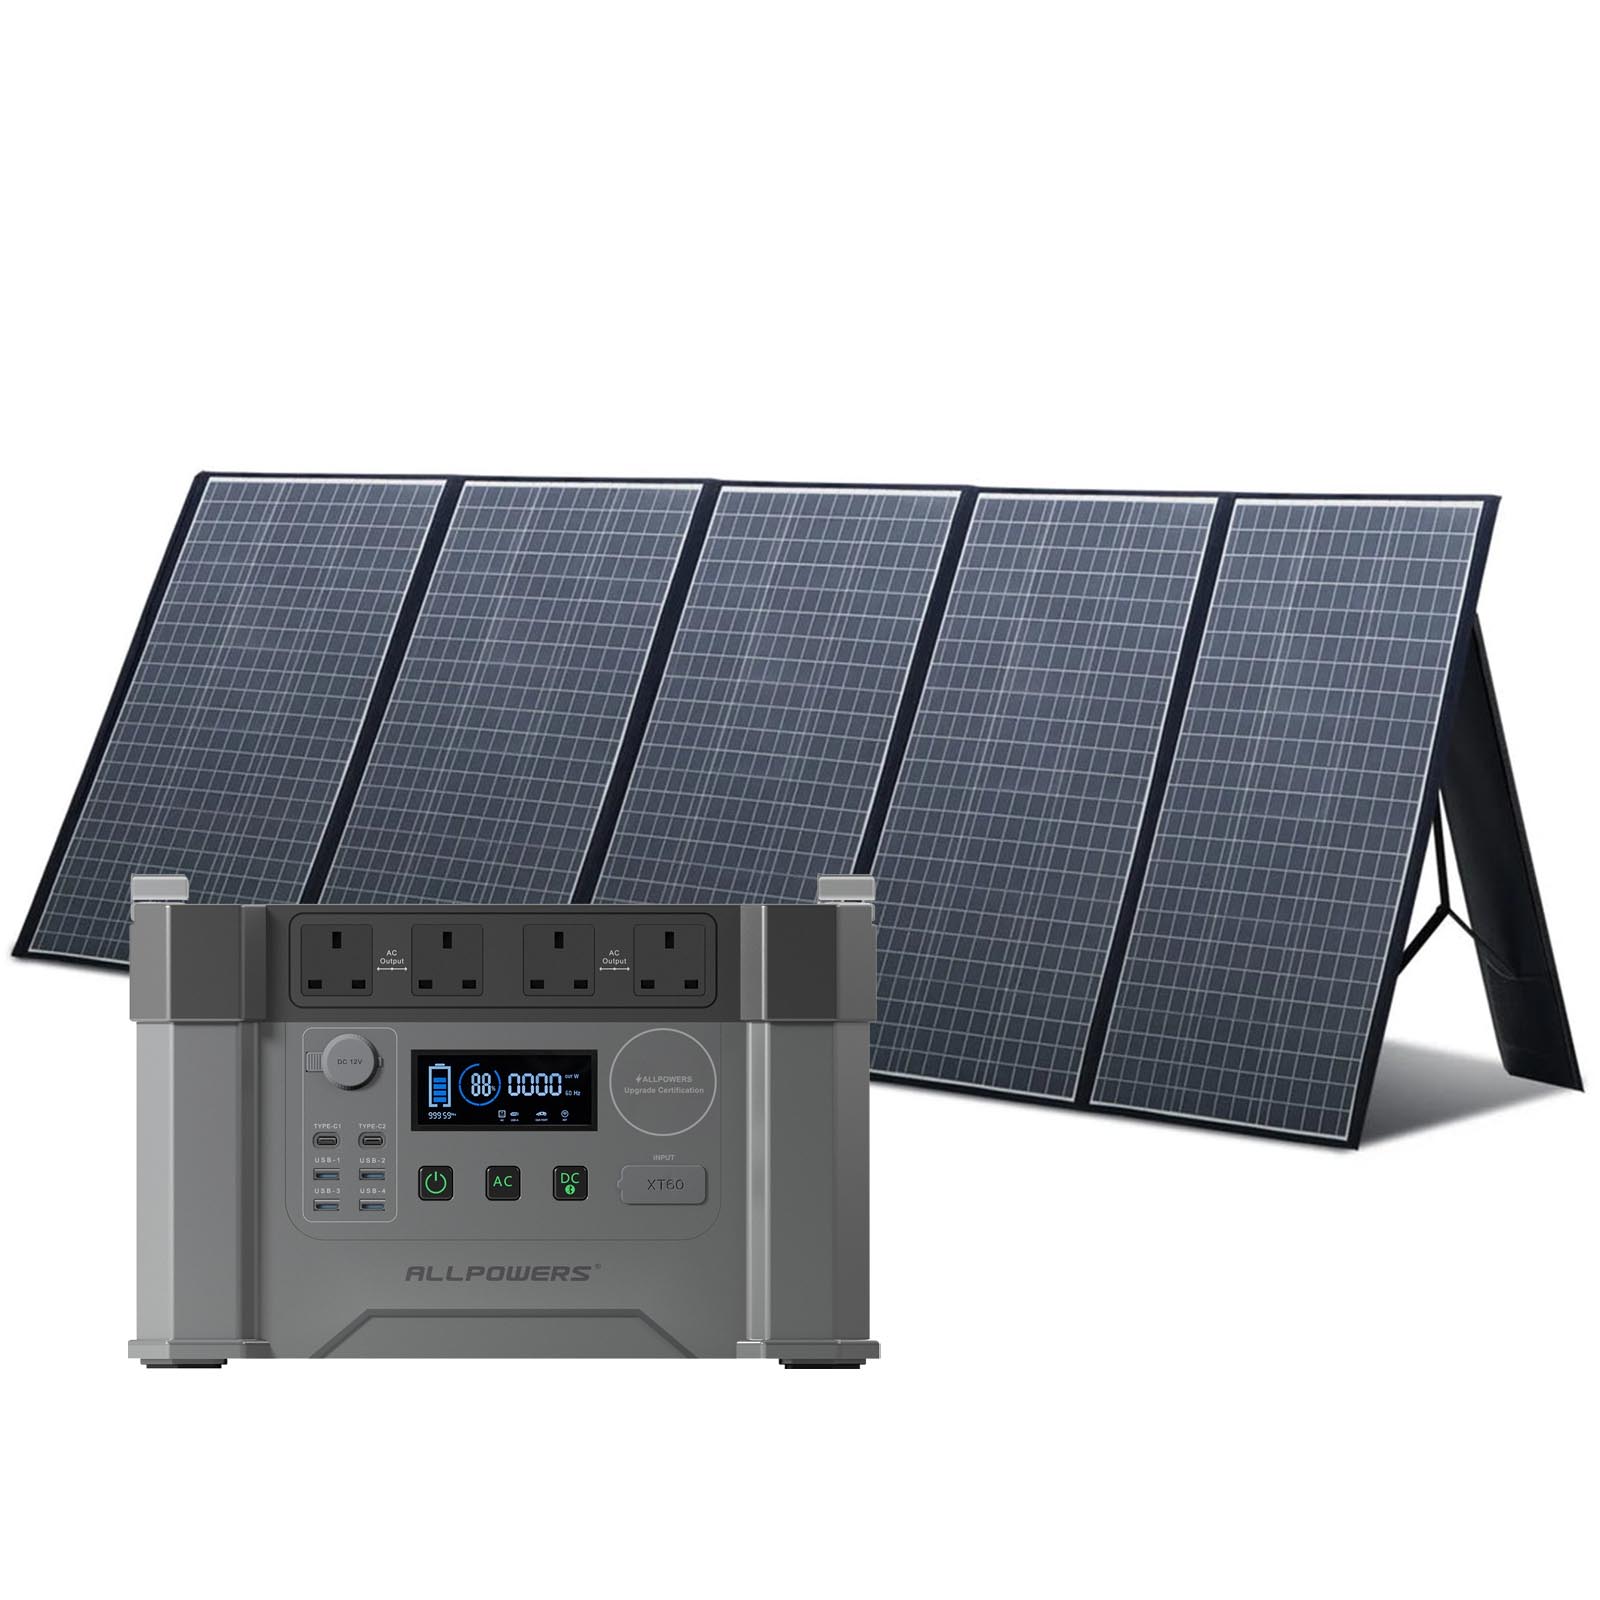 ALLPOWERS S2000 Portable Power Station | 1500Wh 2000W – ALLPOWERS UK